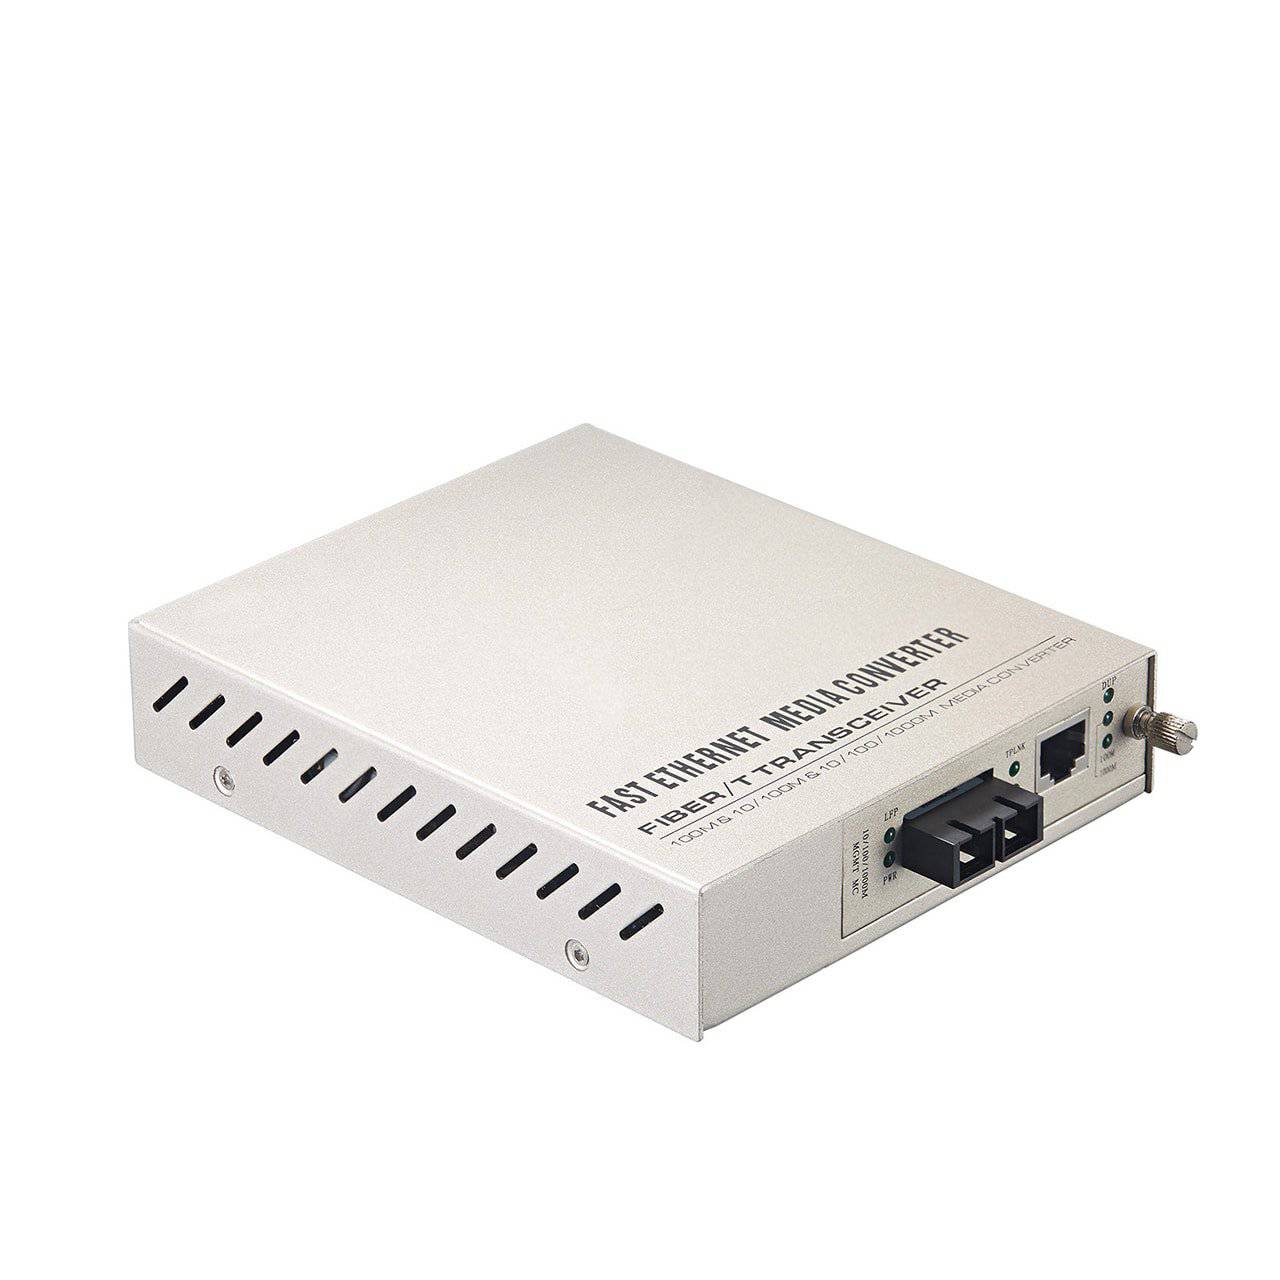 10/100/1000Base-TX to 1000Base-FX Managed GbE Media Converter Card